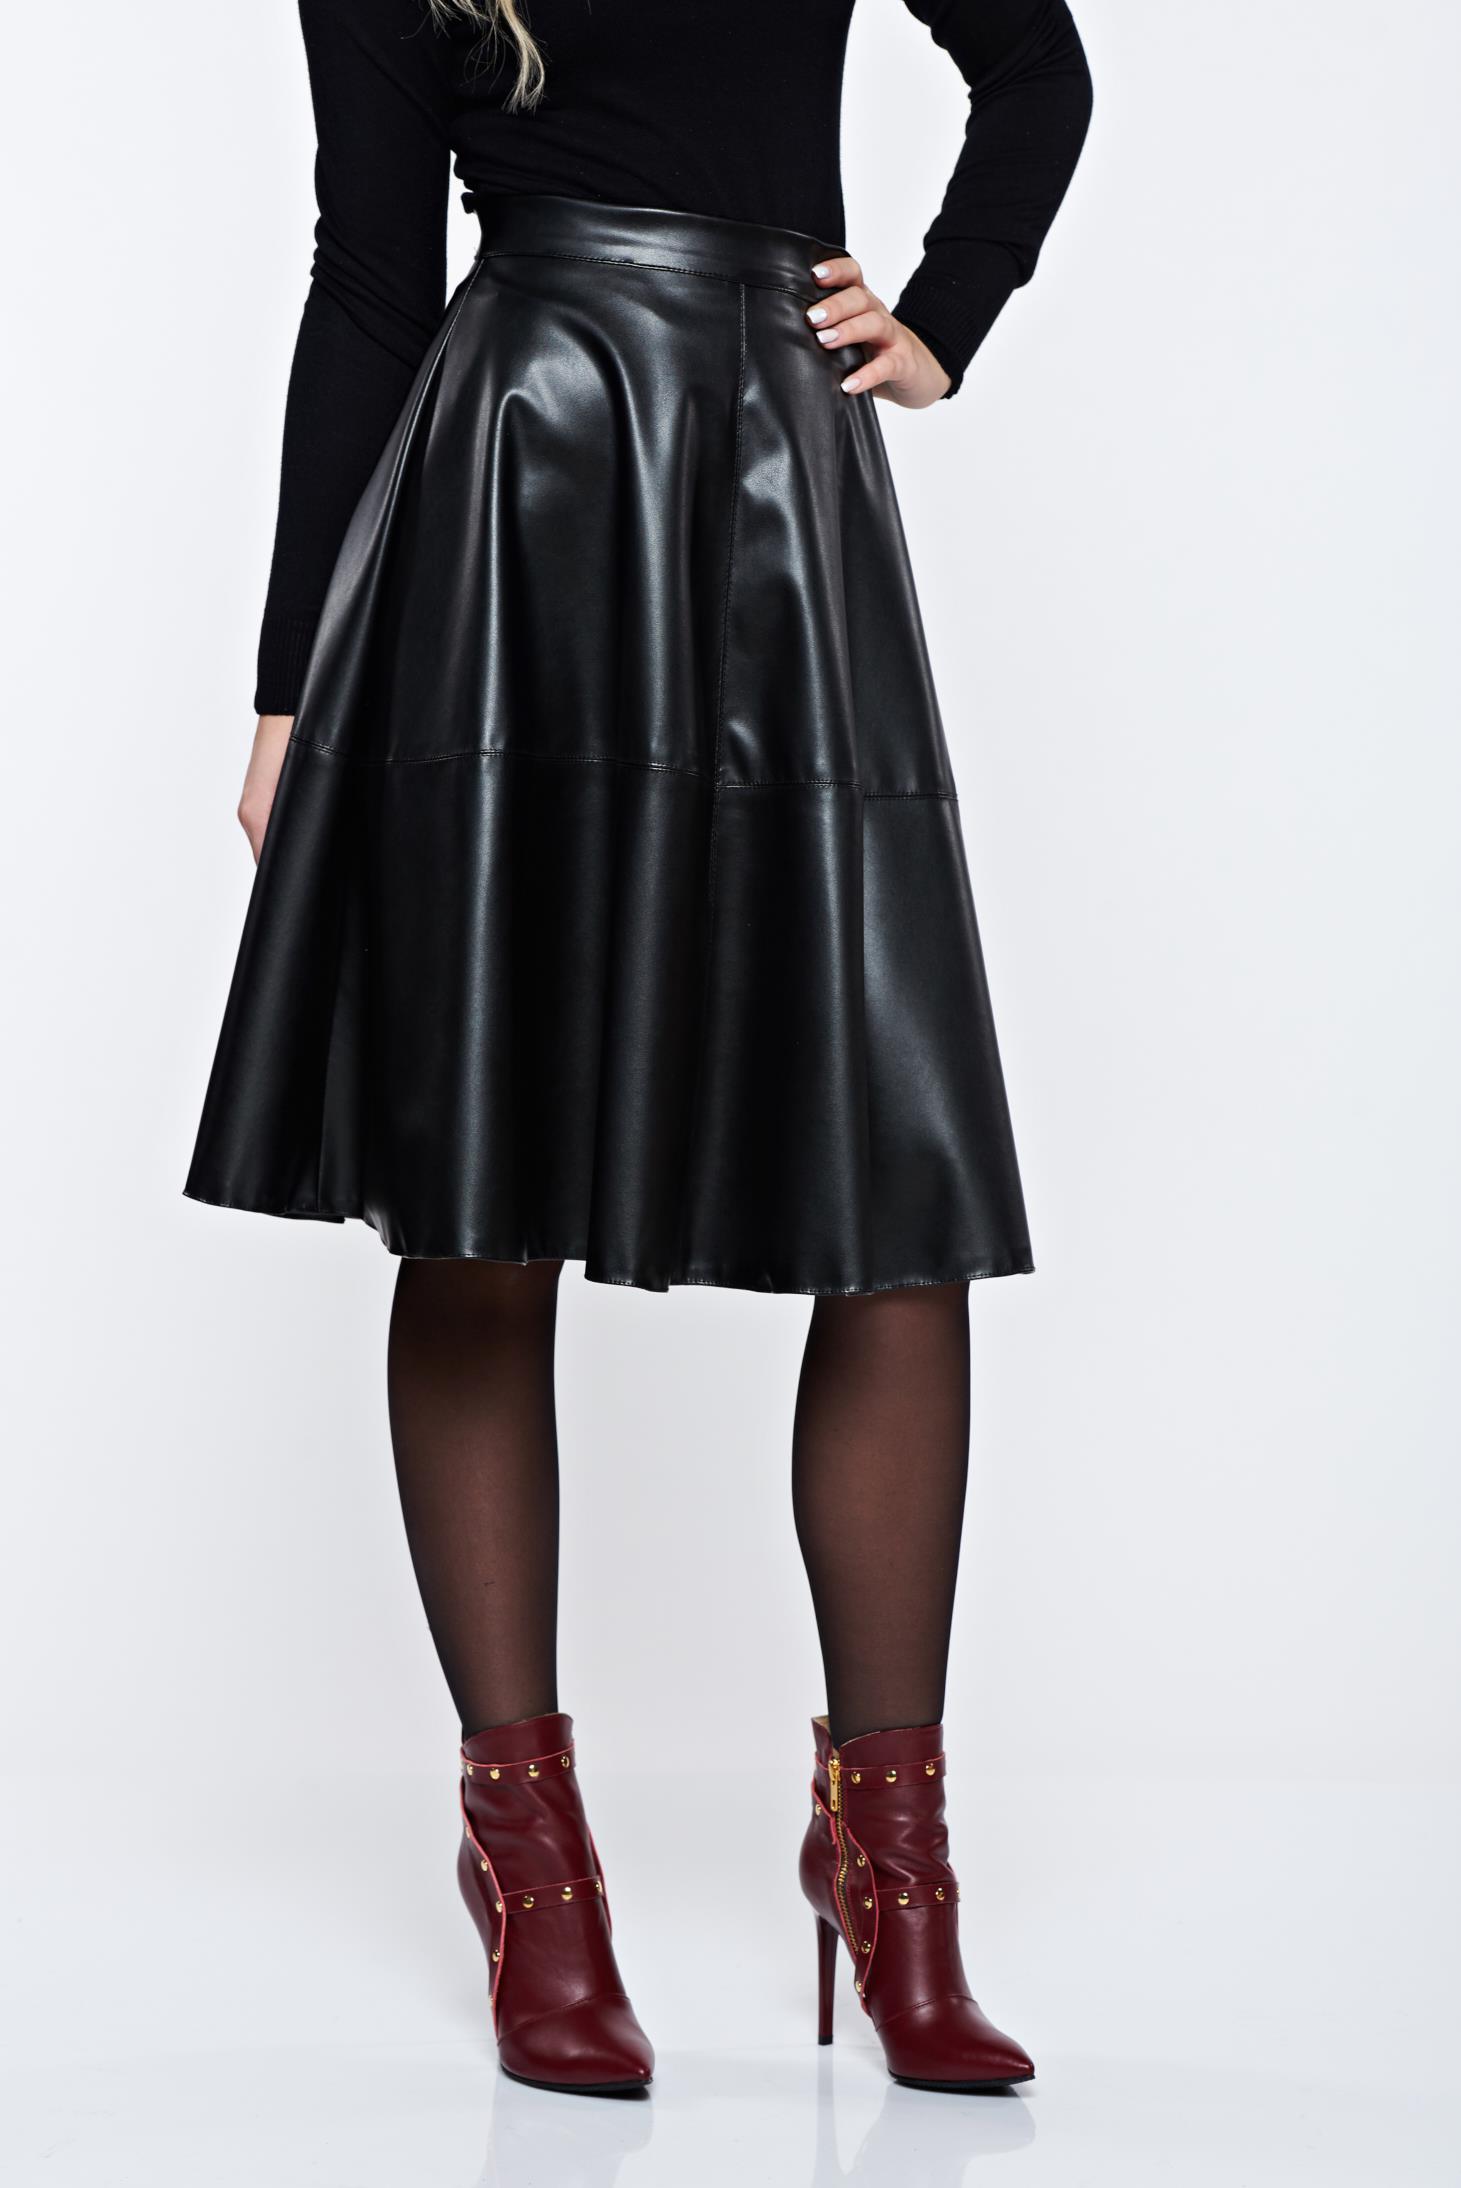 StarShinerS black casual cloche high waisted skirt from ecological leather